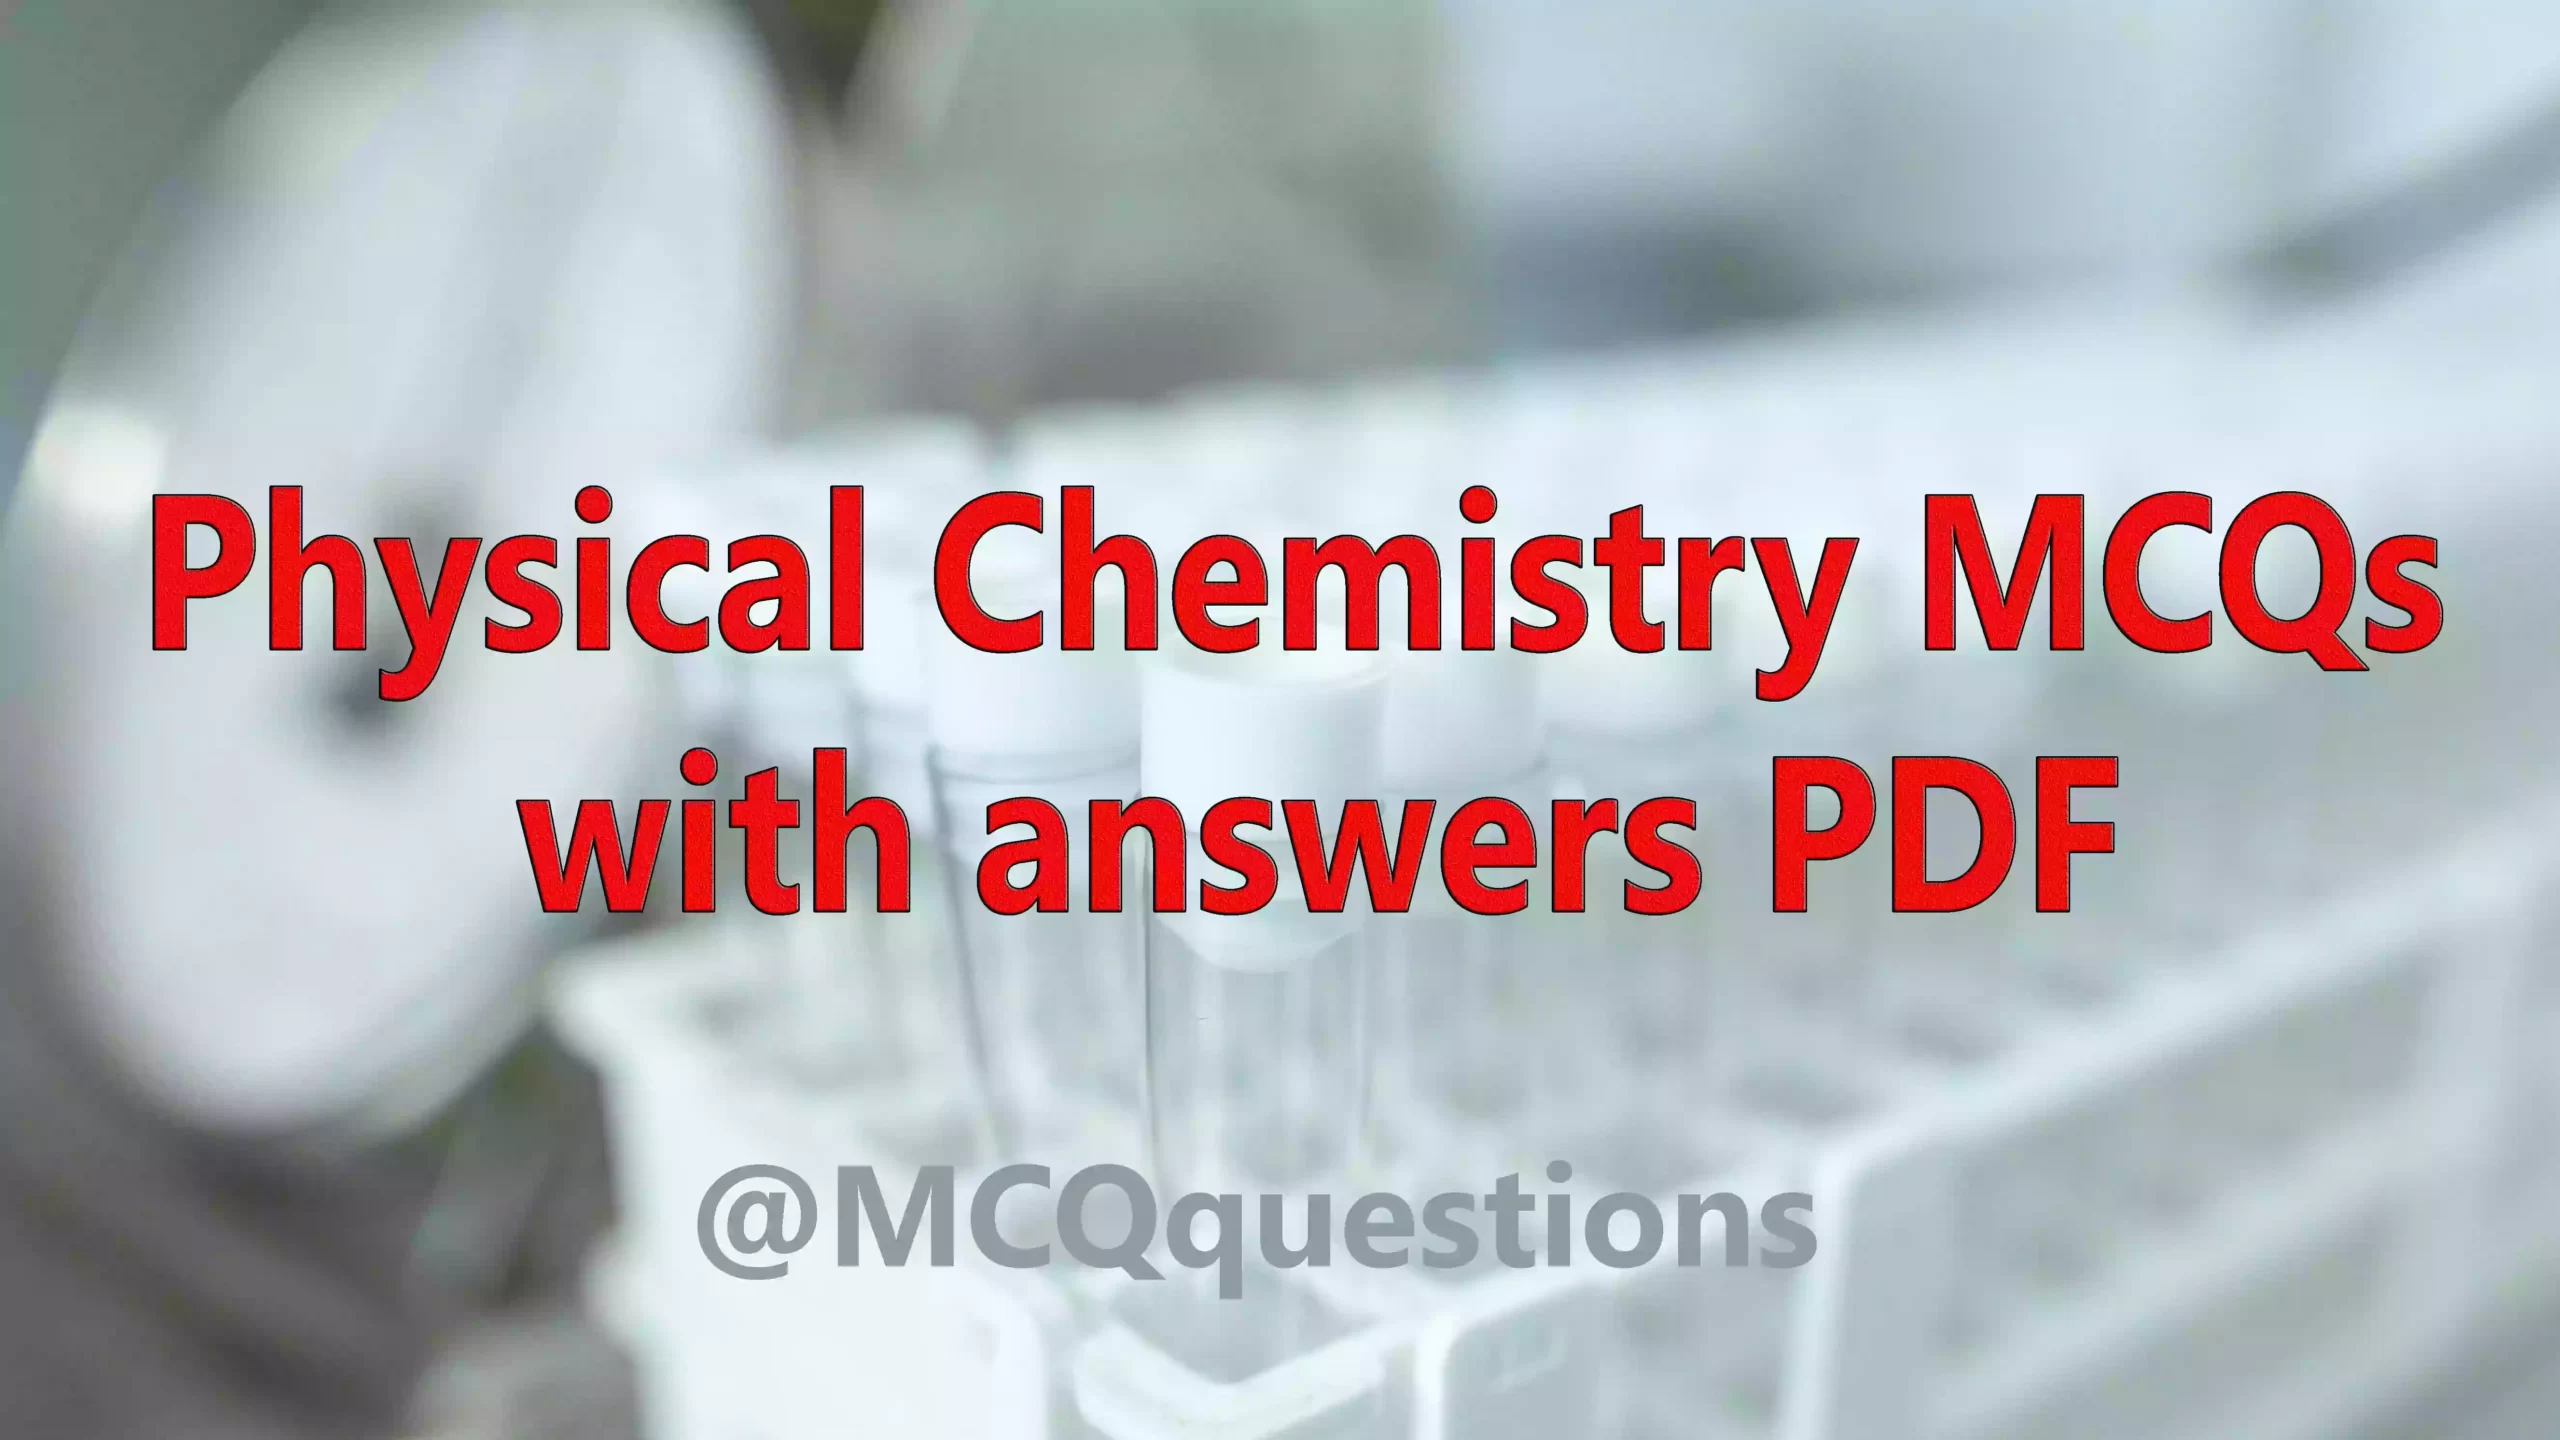 Physical Chemistry MCQs with answers PDF